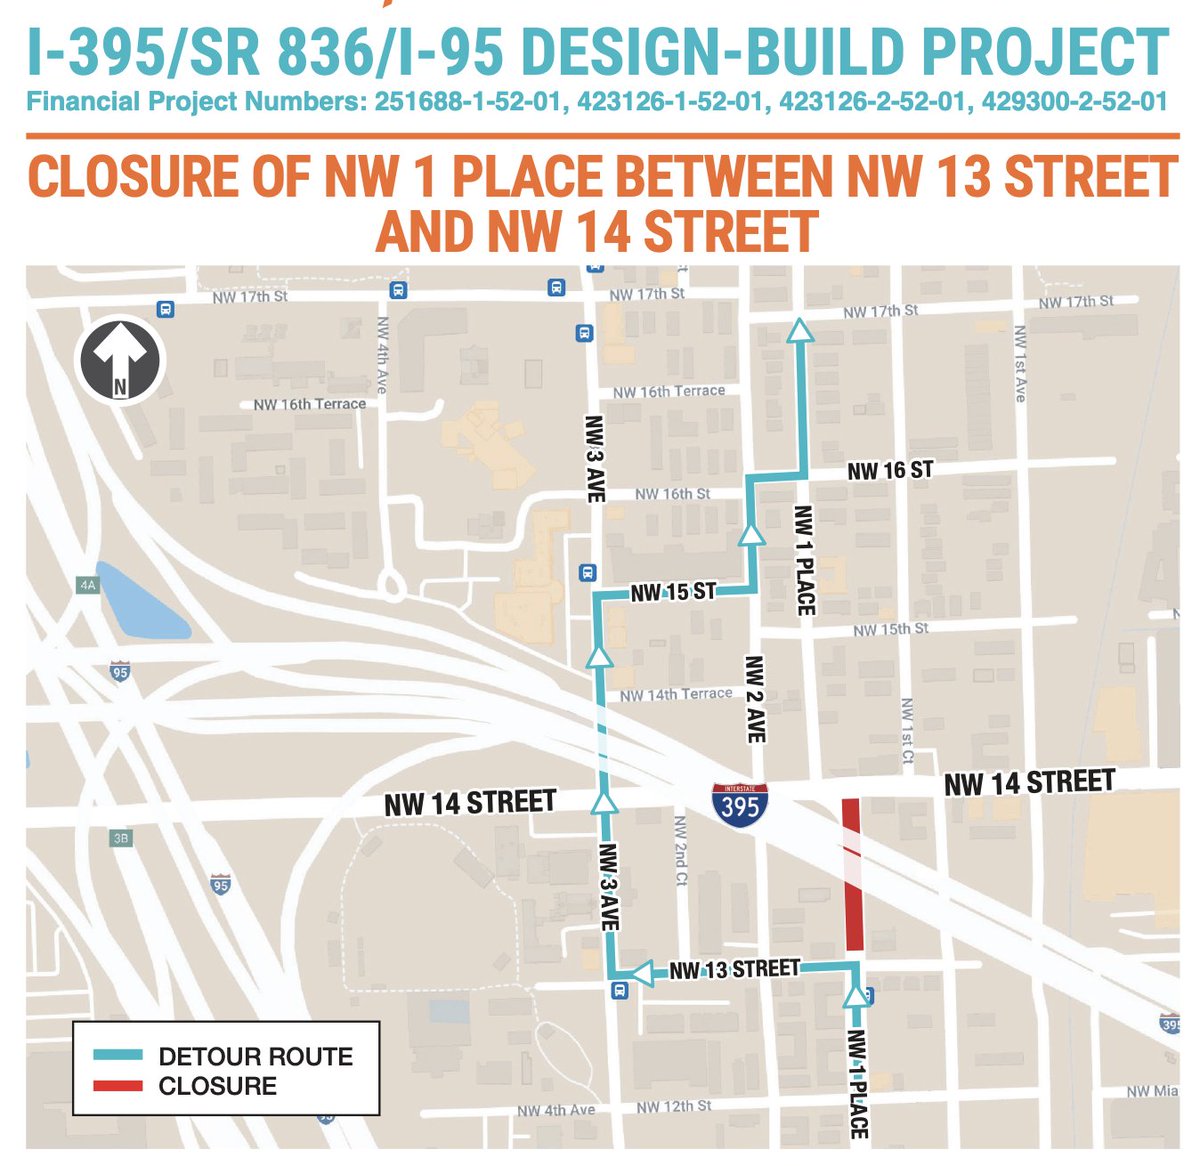 Heads up, Miami! NW 1st Place between NW 13th & 14th Streets CLOSED Fri, April 19th - Mon, April 22nd (10pm-5:30am) for bridge removal. Detours: NW 13th W to NW 3rd, NW 15th R to NW 2nd, or NW 16th R to NW 1 Place. Expect noise & follow safety signage. @MyFDOT_Miami